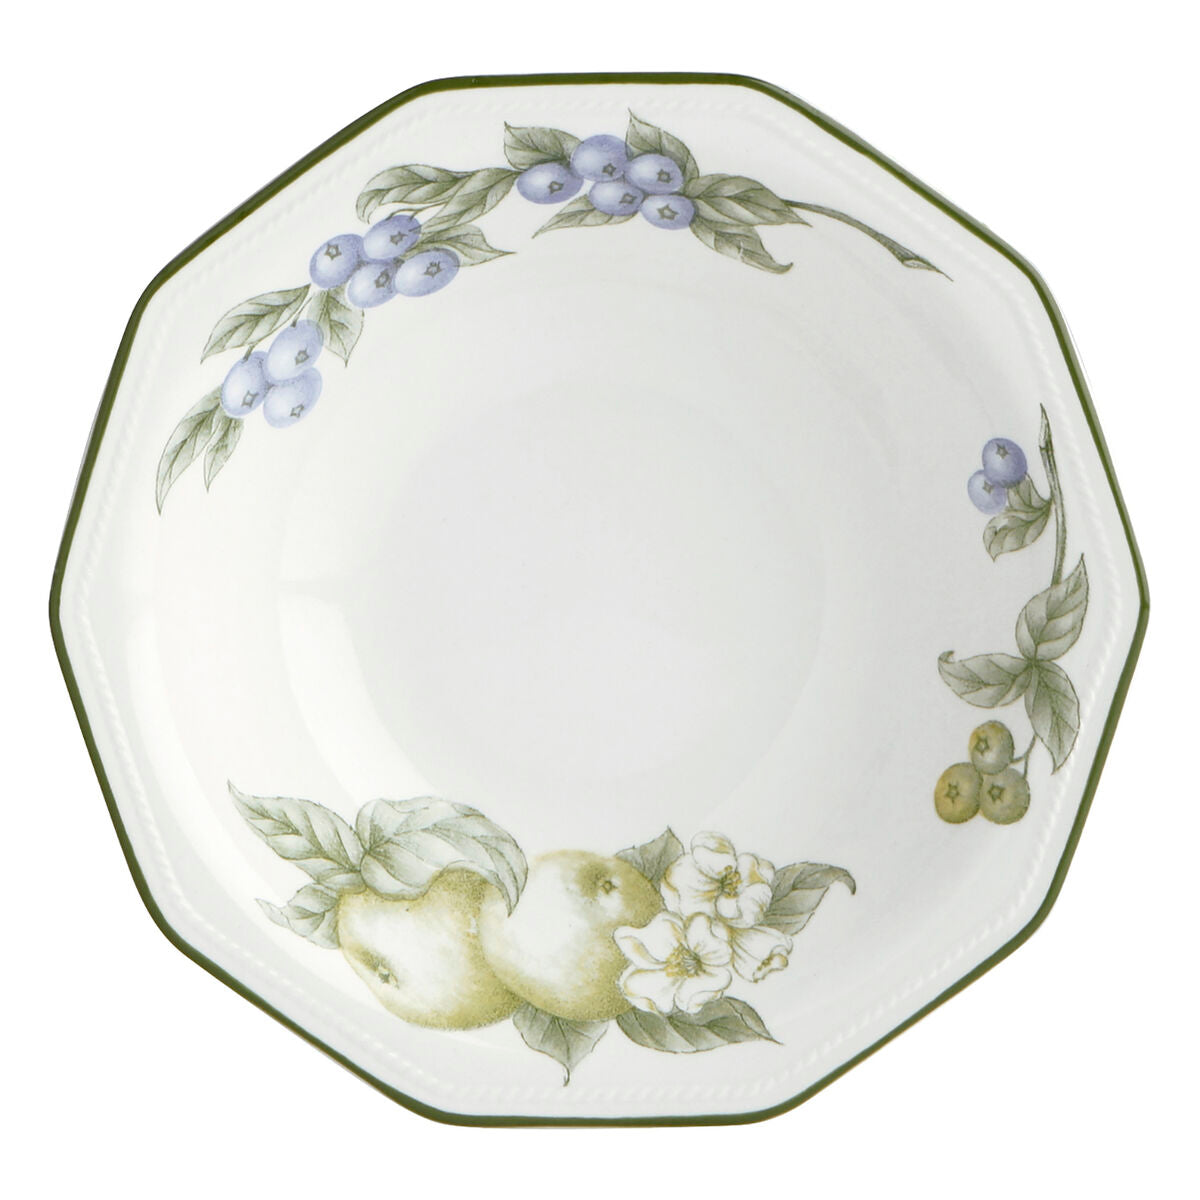 Set of 6 Classic Ceramic Deep Plates with Fruit